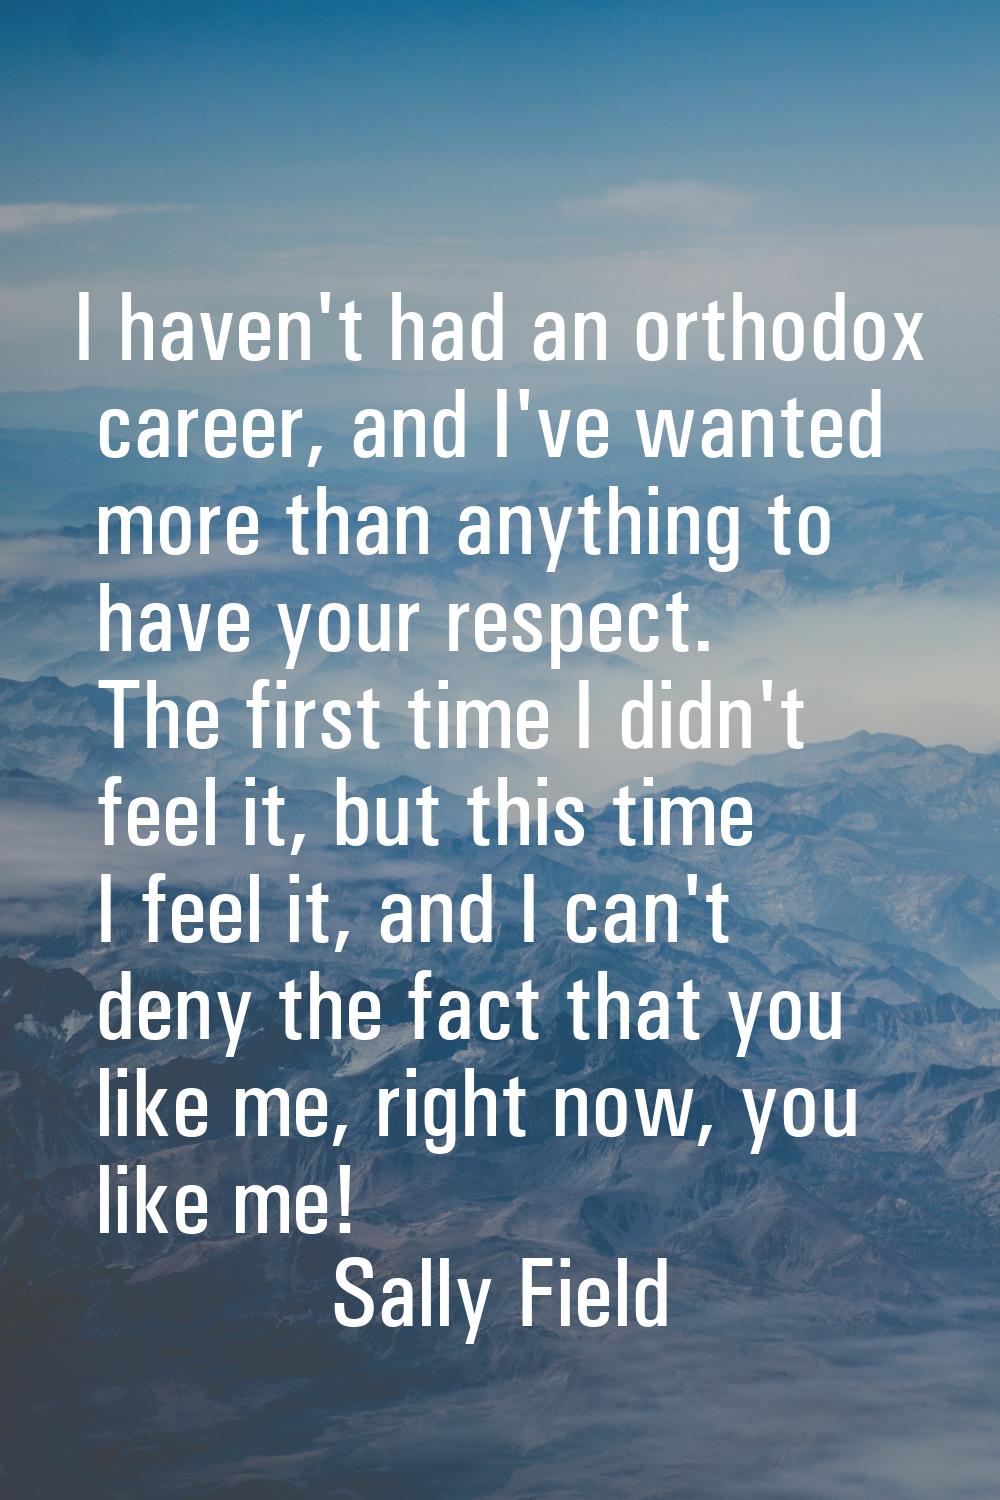 I haven't had an orthodox career, and I've wanted more than anything to have your respect. The firs